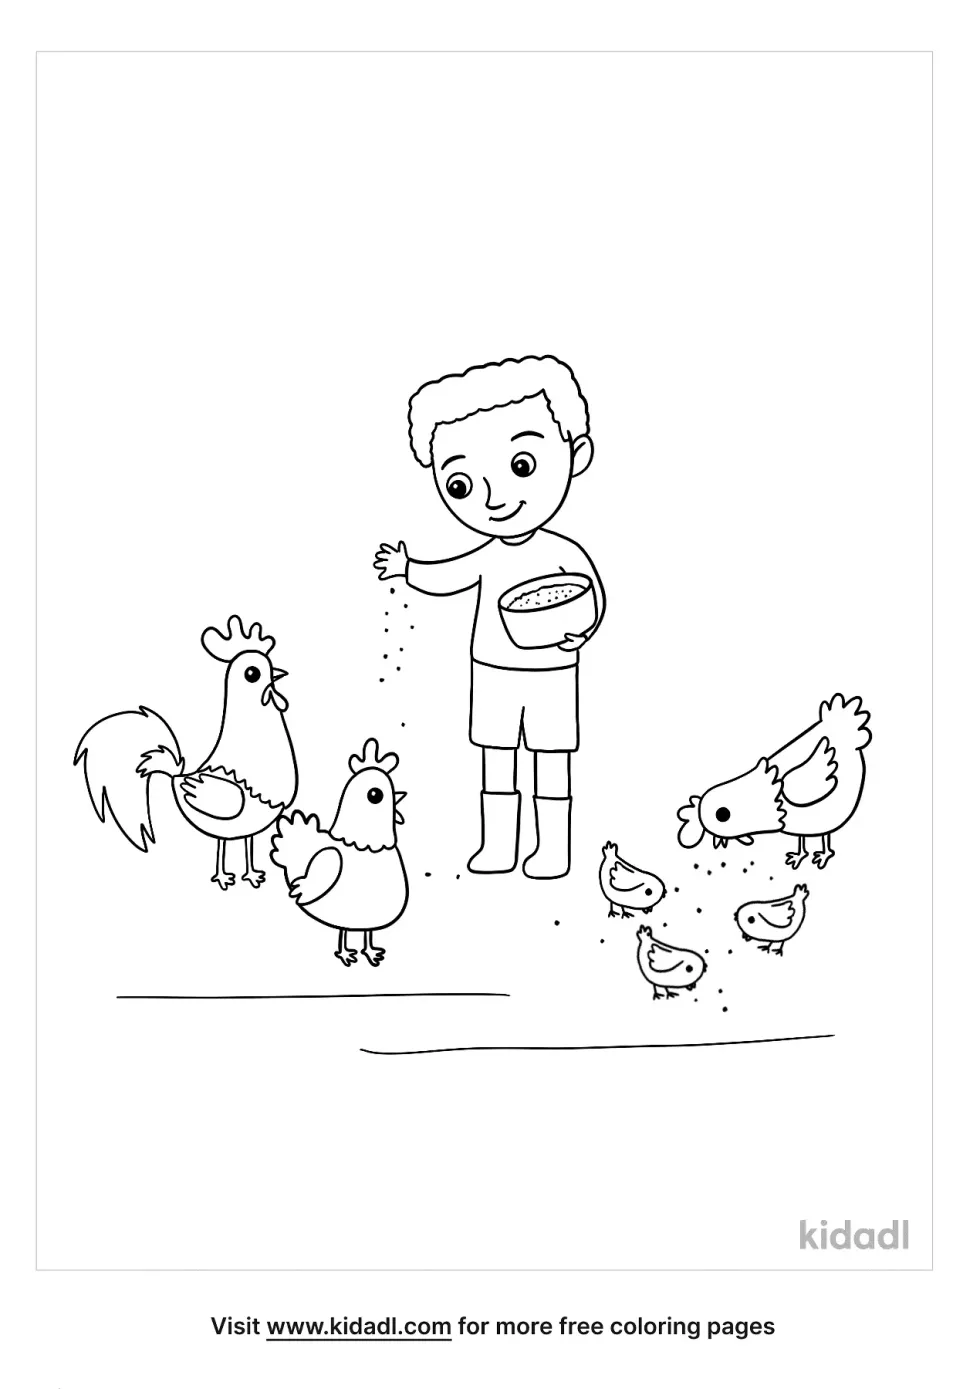 Boy With Animals Coloring Page